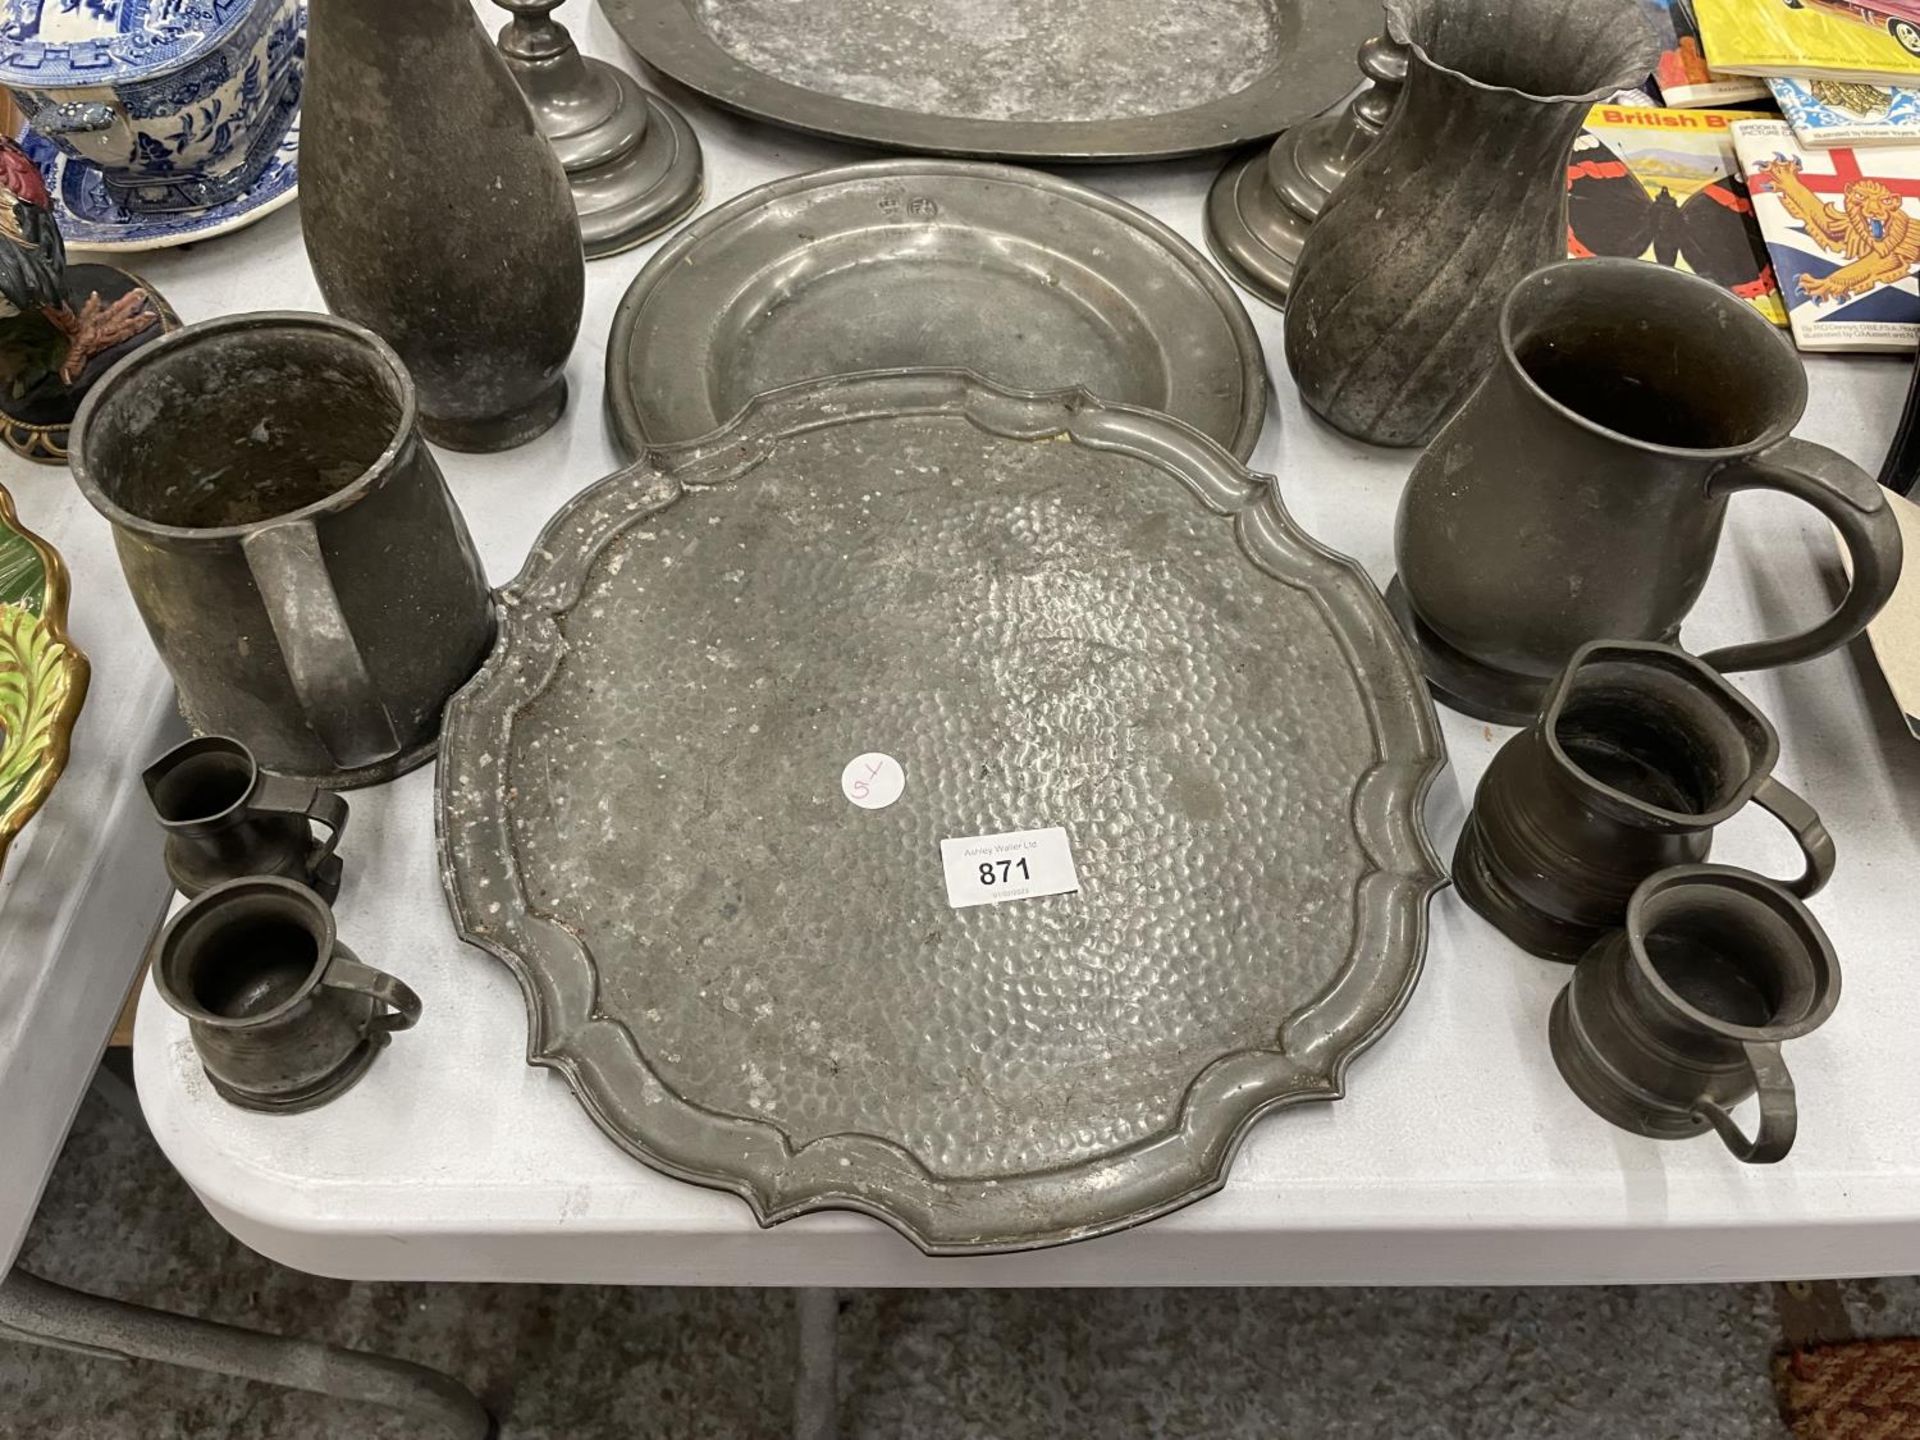 A LARGE QUANTITY OF VINTAGE PEWTER TO INCLUDE PLATES, VASES, CANDLESTICKS AND TANKARDS - Image 2 of 3